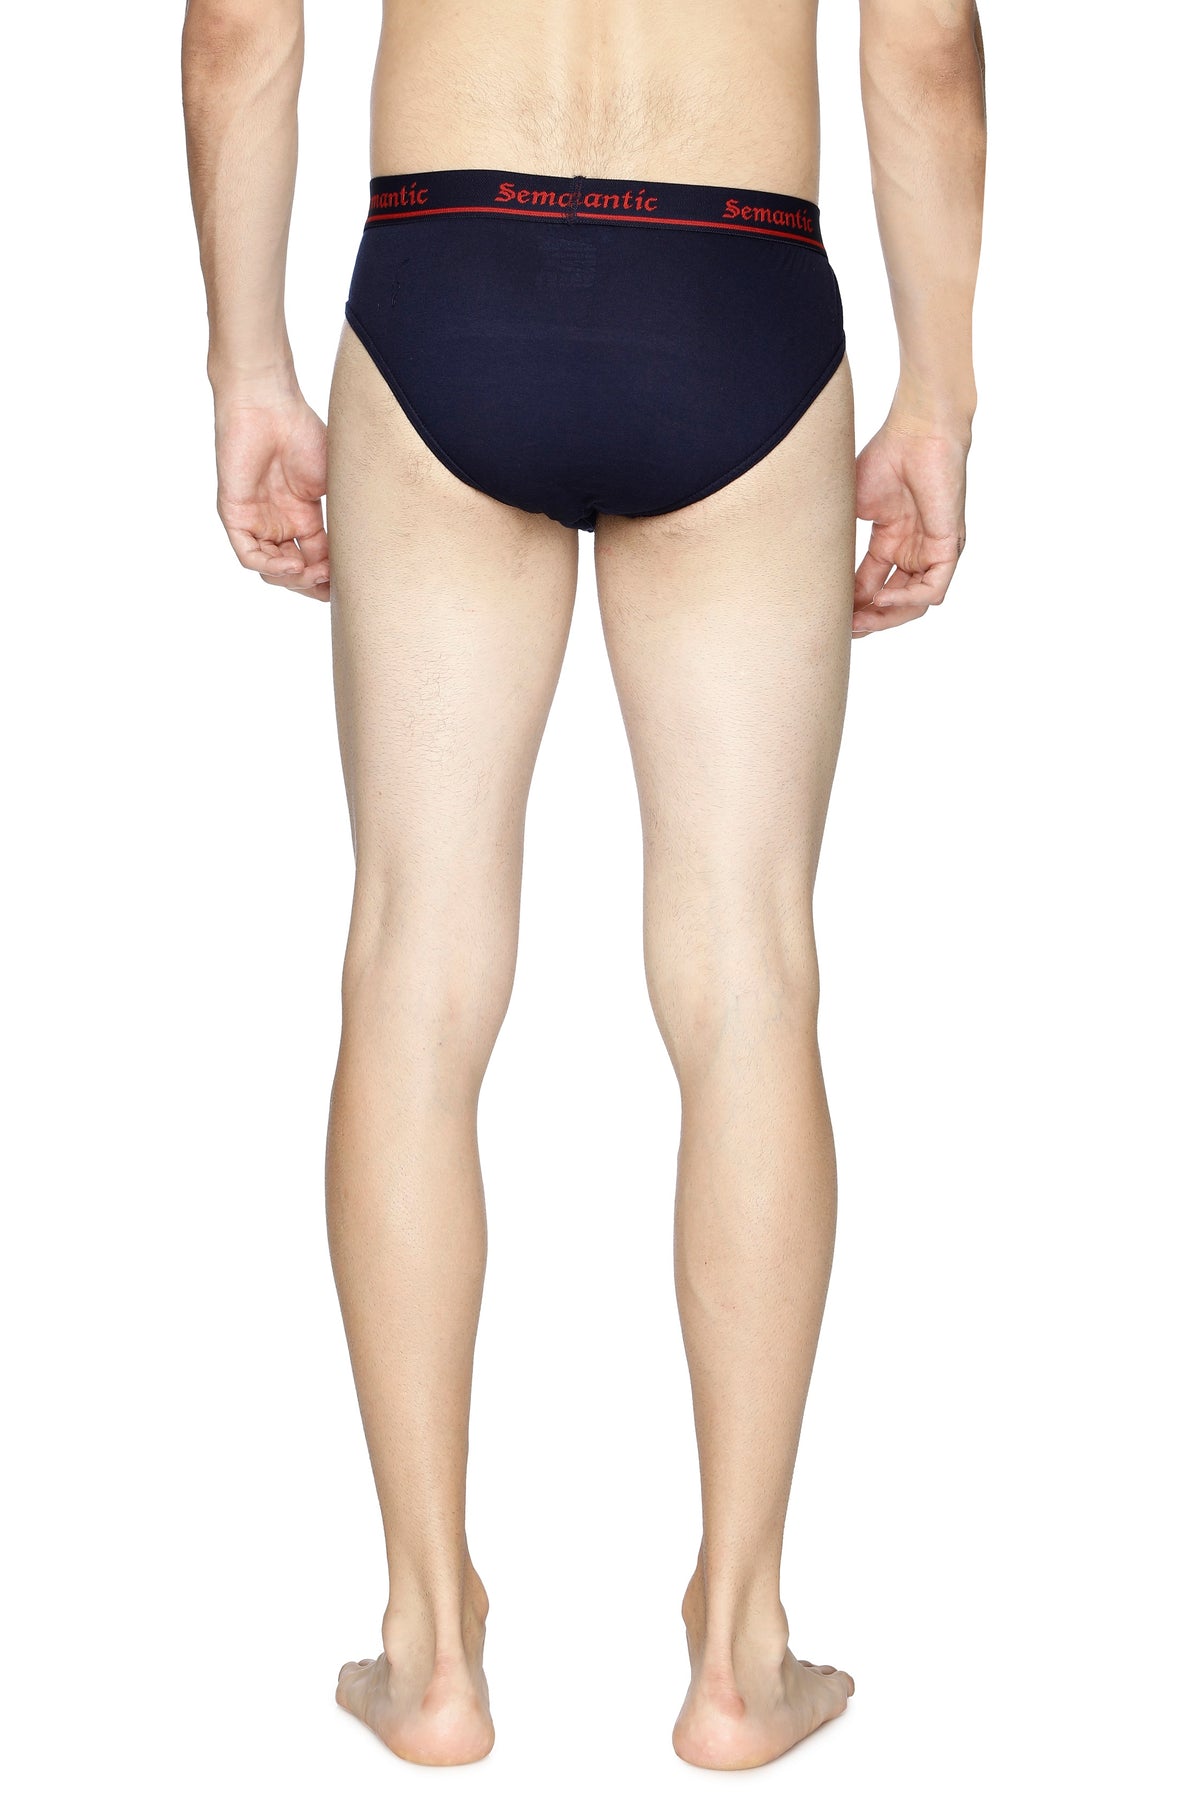 Semantic Cotton Briefs - Inner Waistband - Solid at Rs 189.00